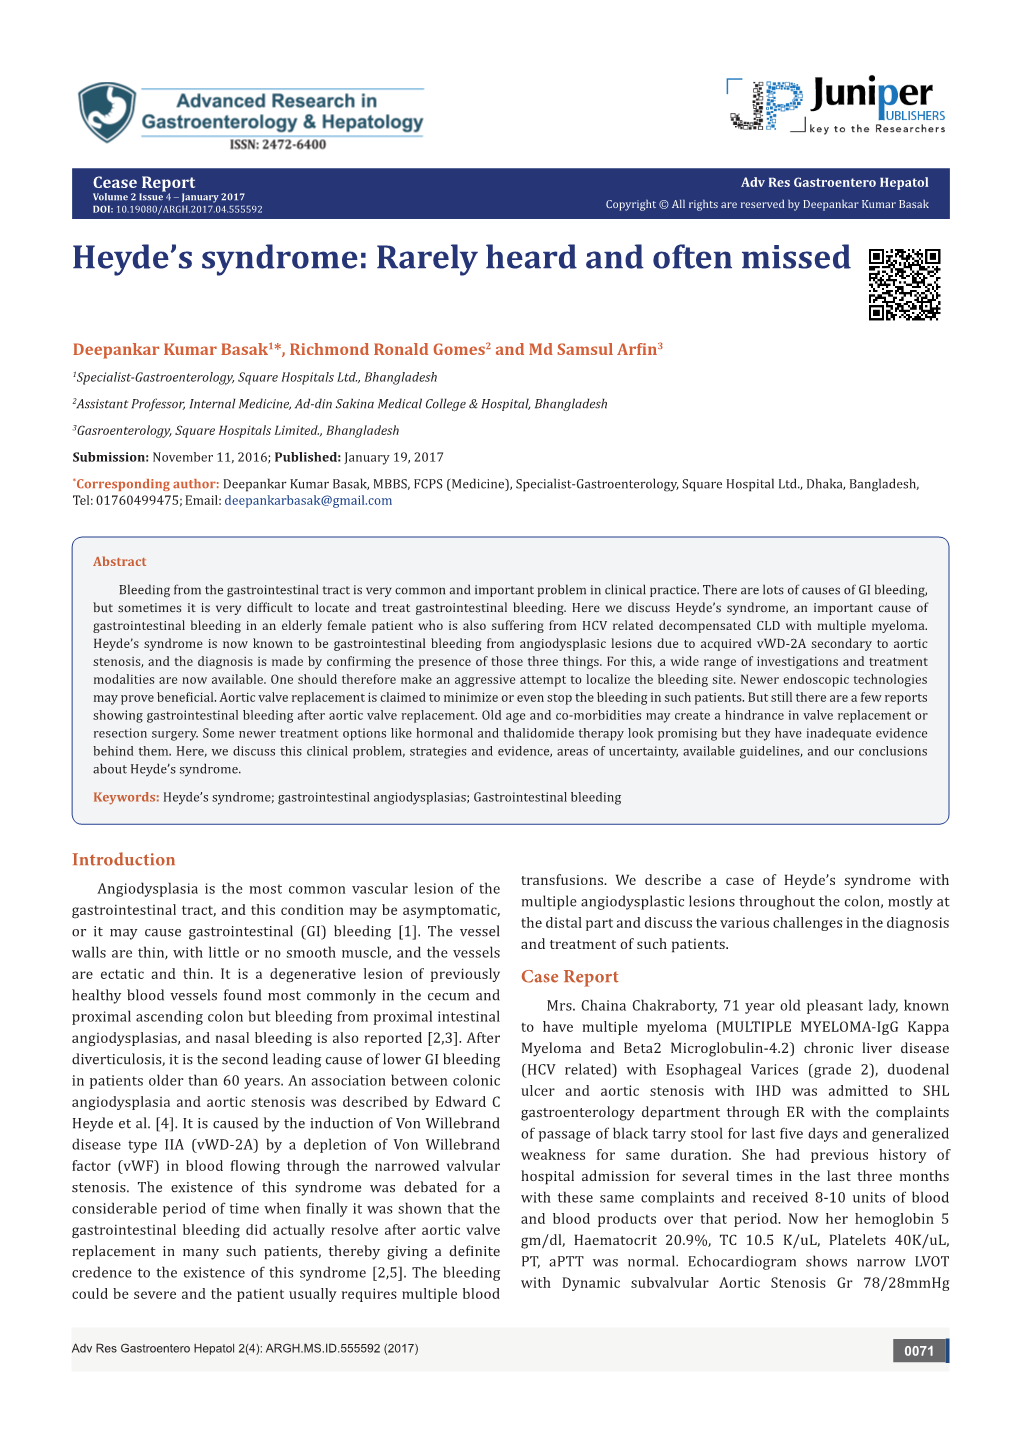 Heyde's Syndrome